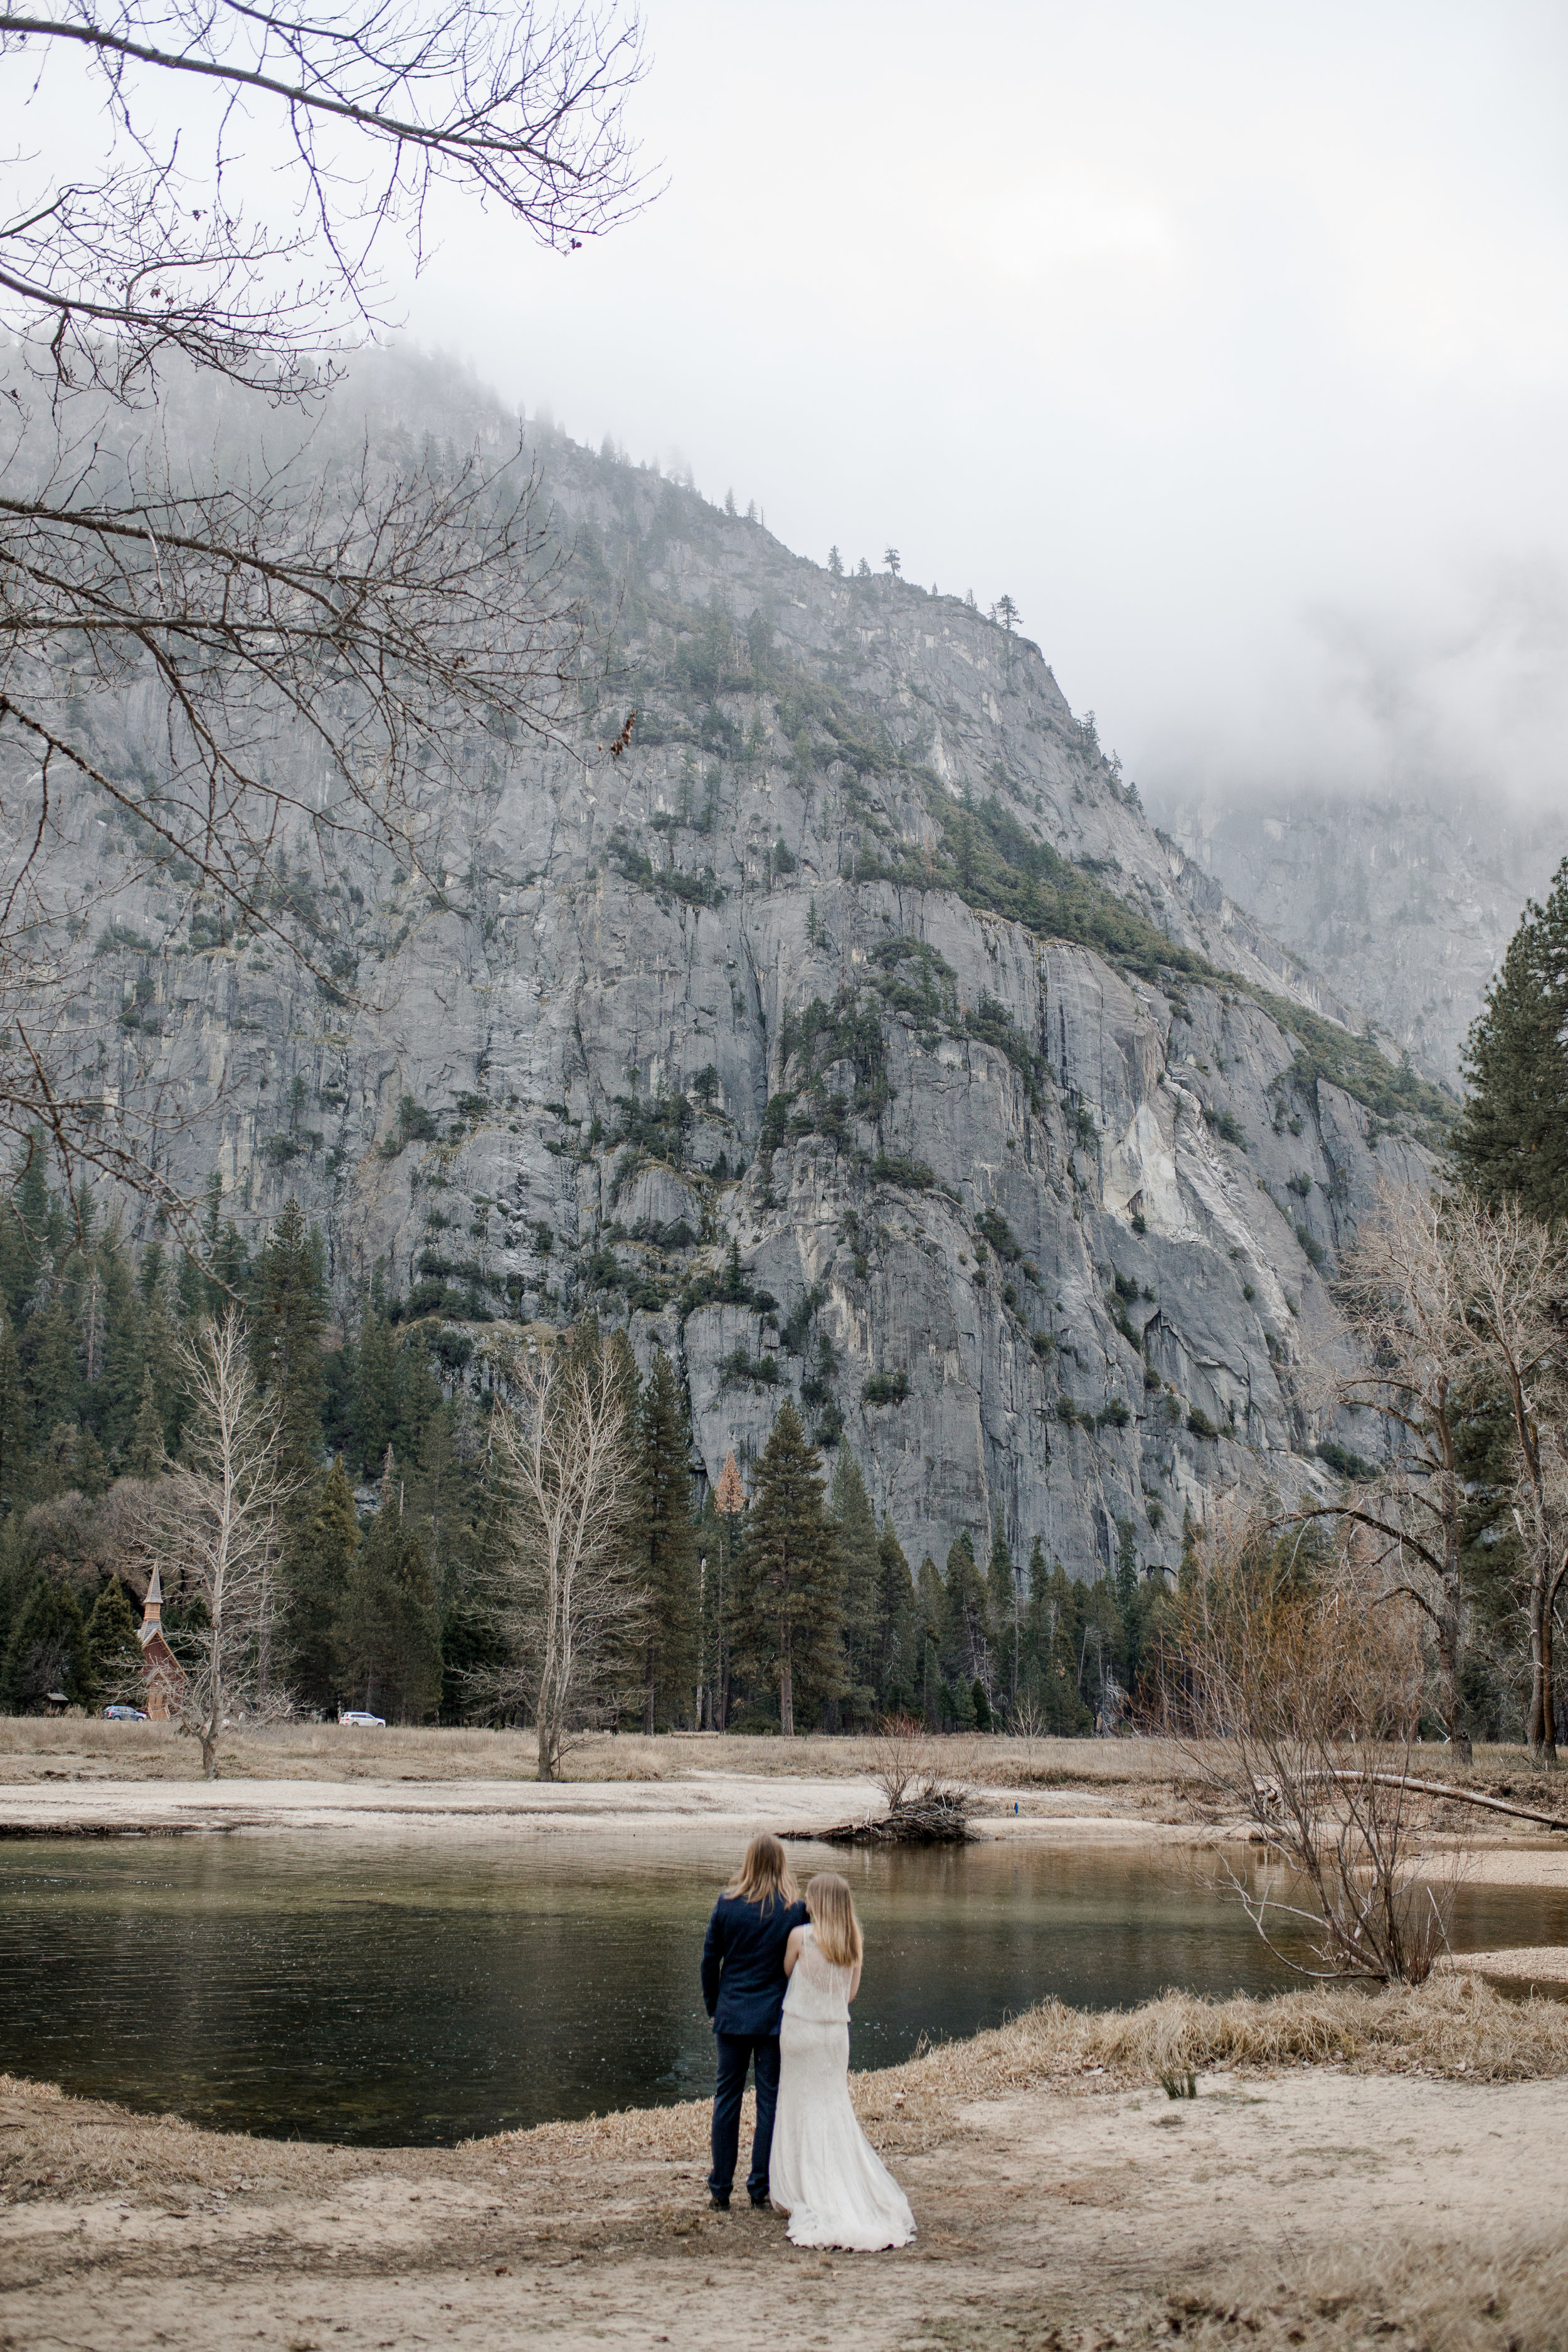 nicole-daacke-photography-yousemite-national-park-elopement-photographer-winter-cloud-moody-elope-inspiration-yosemite-valley-tunnel-view-winter-cloud-fog-weather-wedding-photos-29.jpg